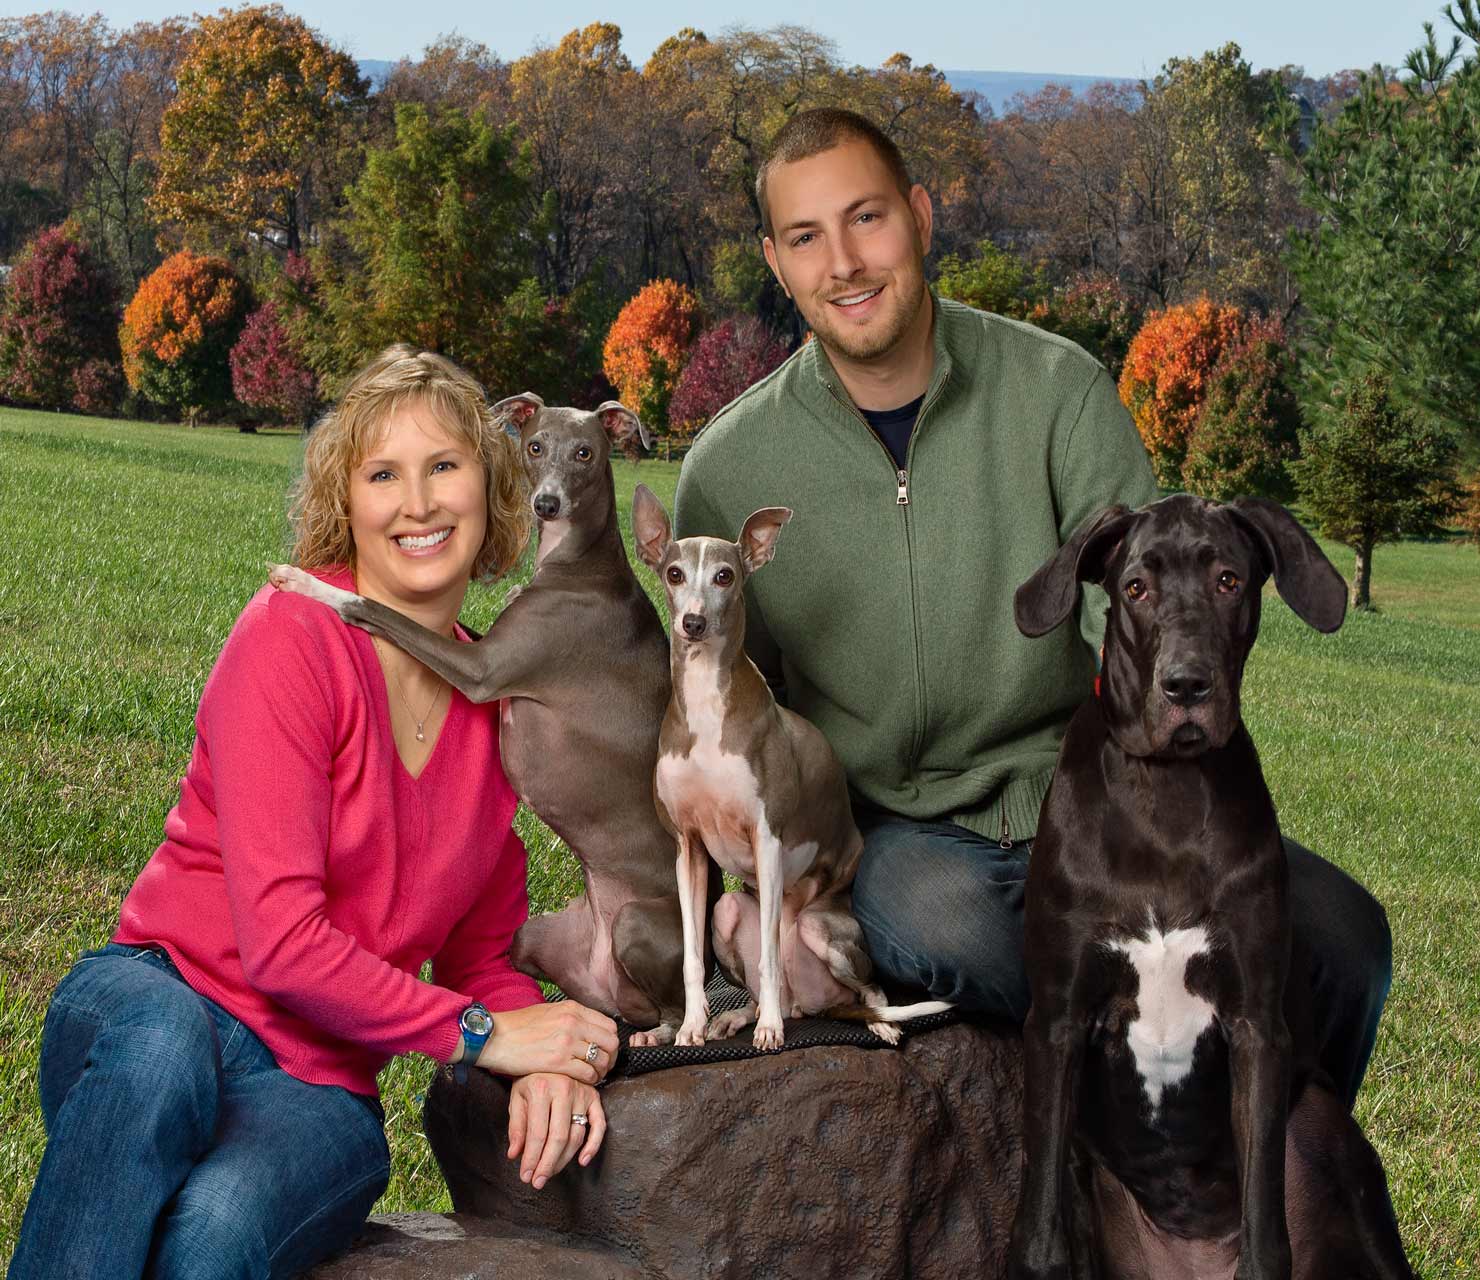 A man and woman posing with two dogs.